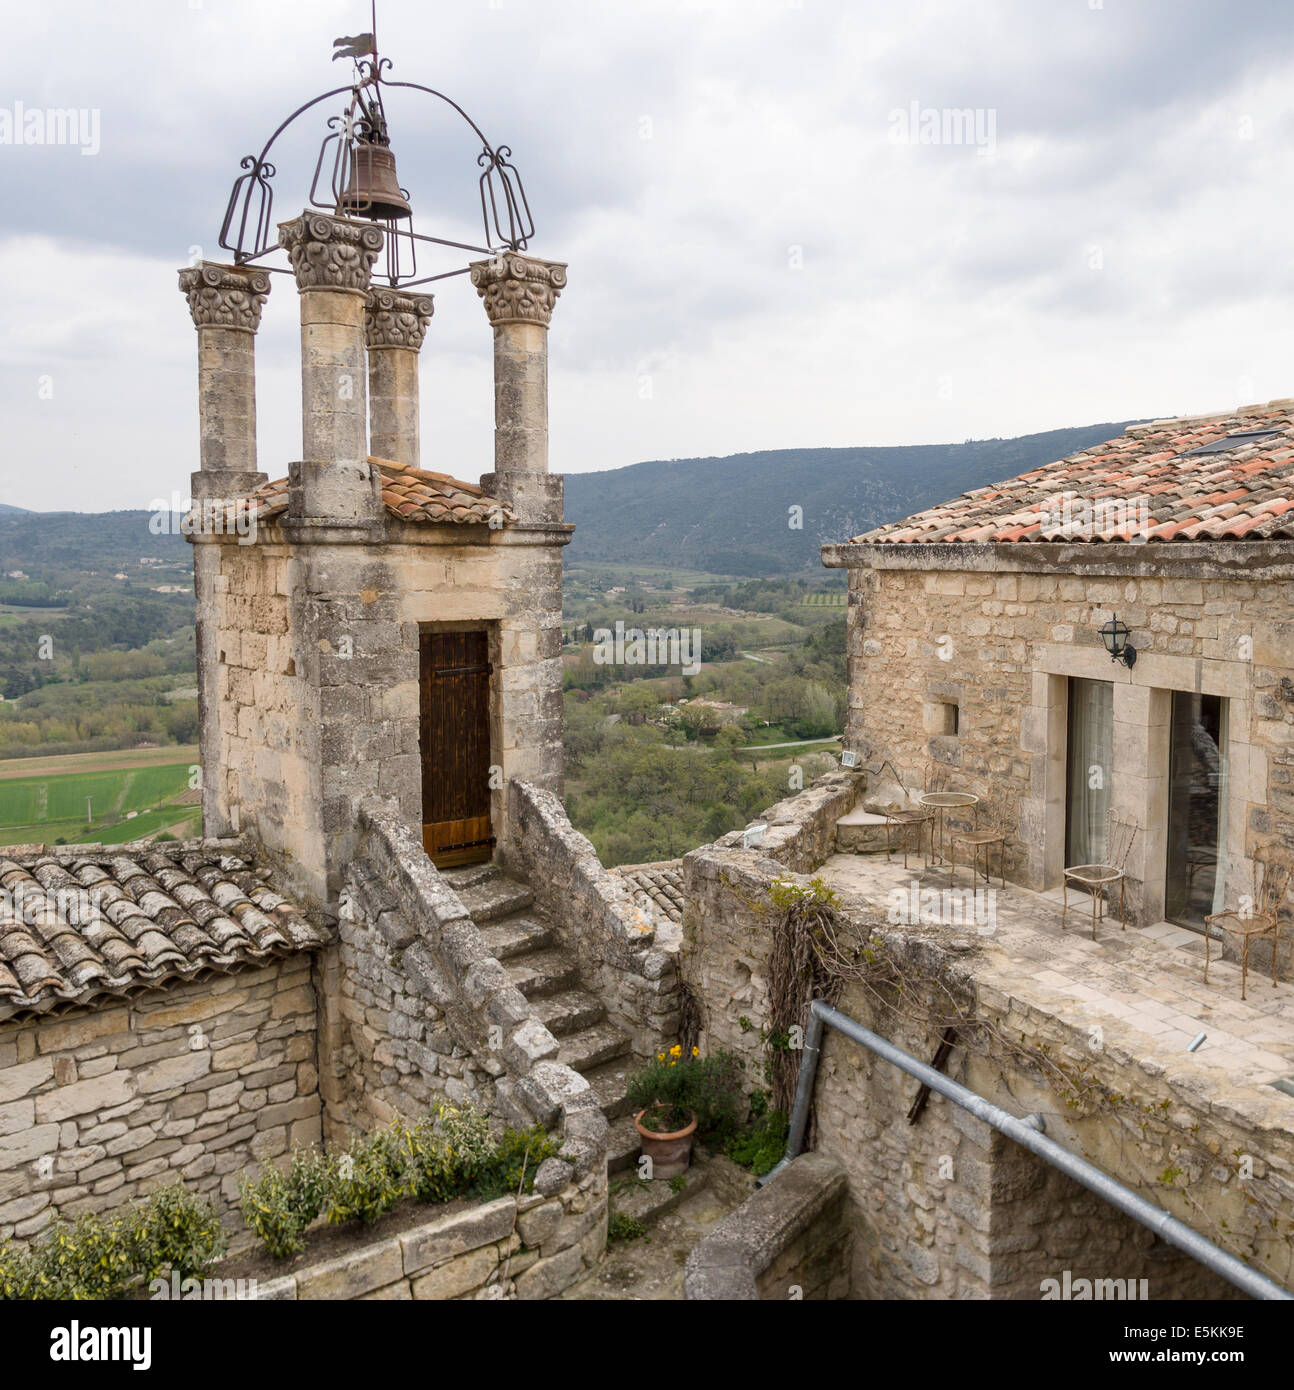 Lacoste Campanile, the Village Bell Tower. The steps up to the bell and  clock tower in this small restored medieval village Stock Photo - Alamy